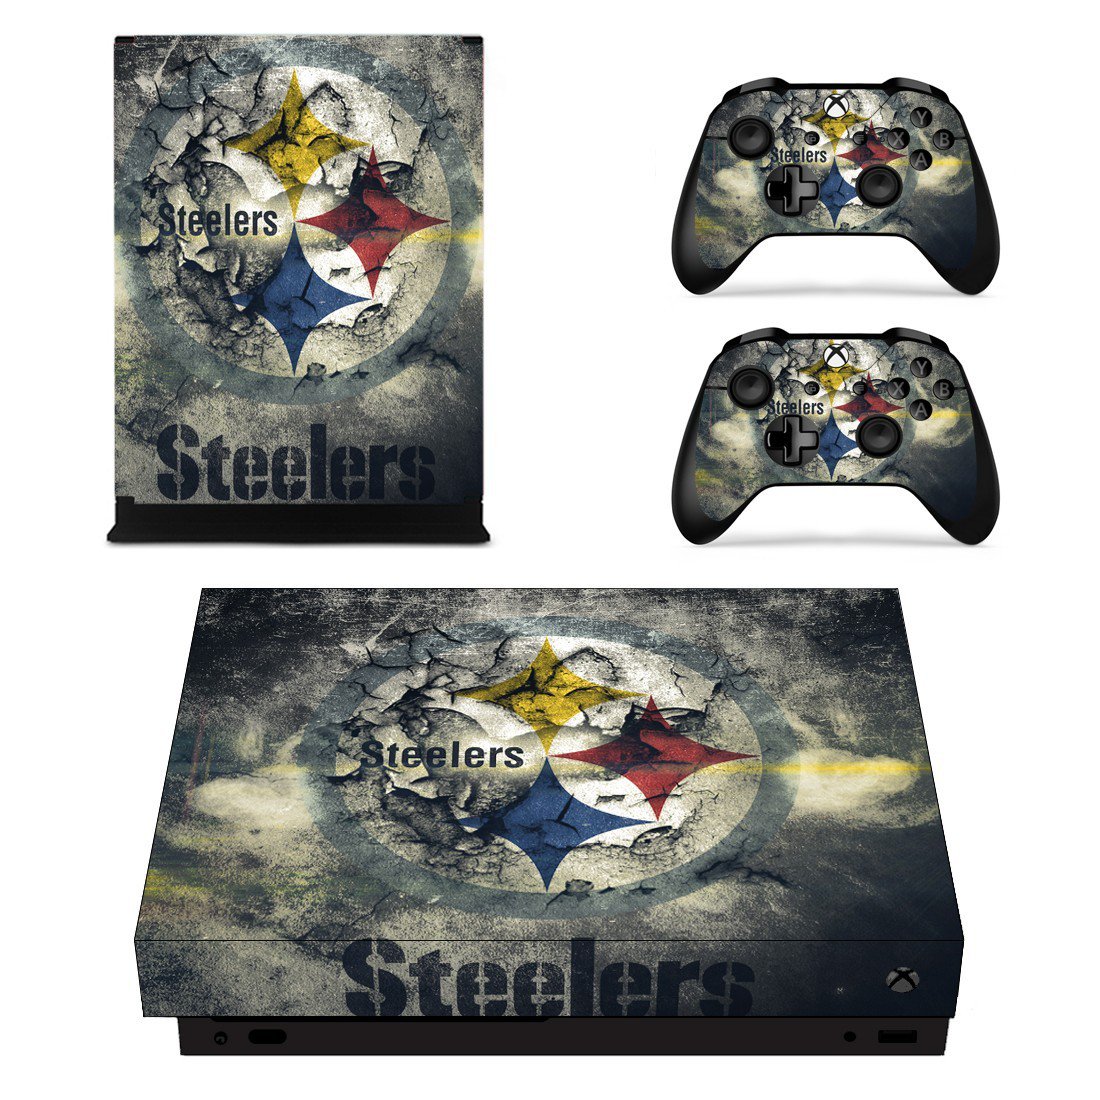 steelers xbox one controller